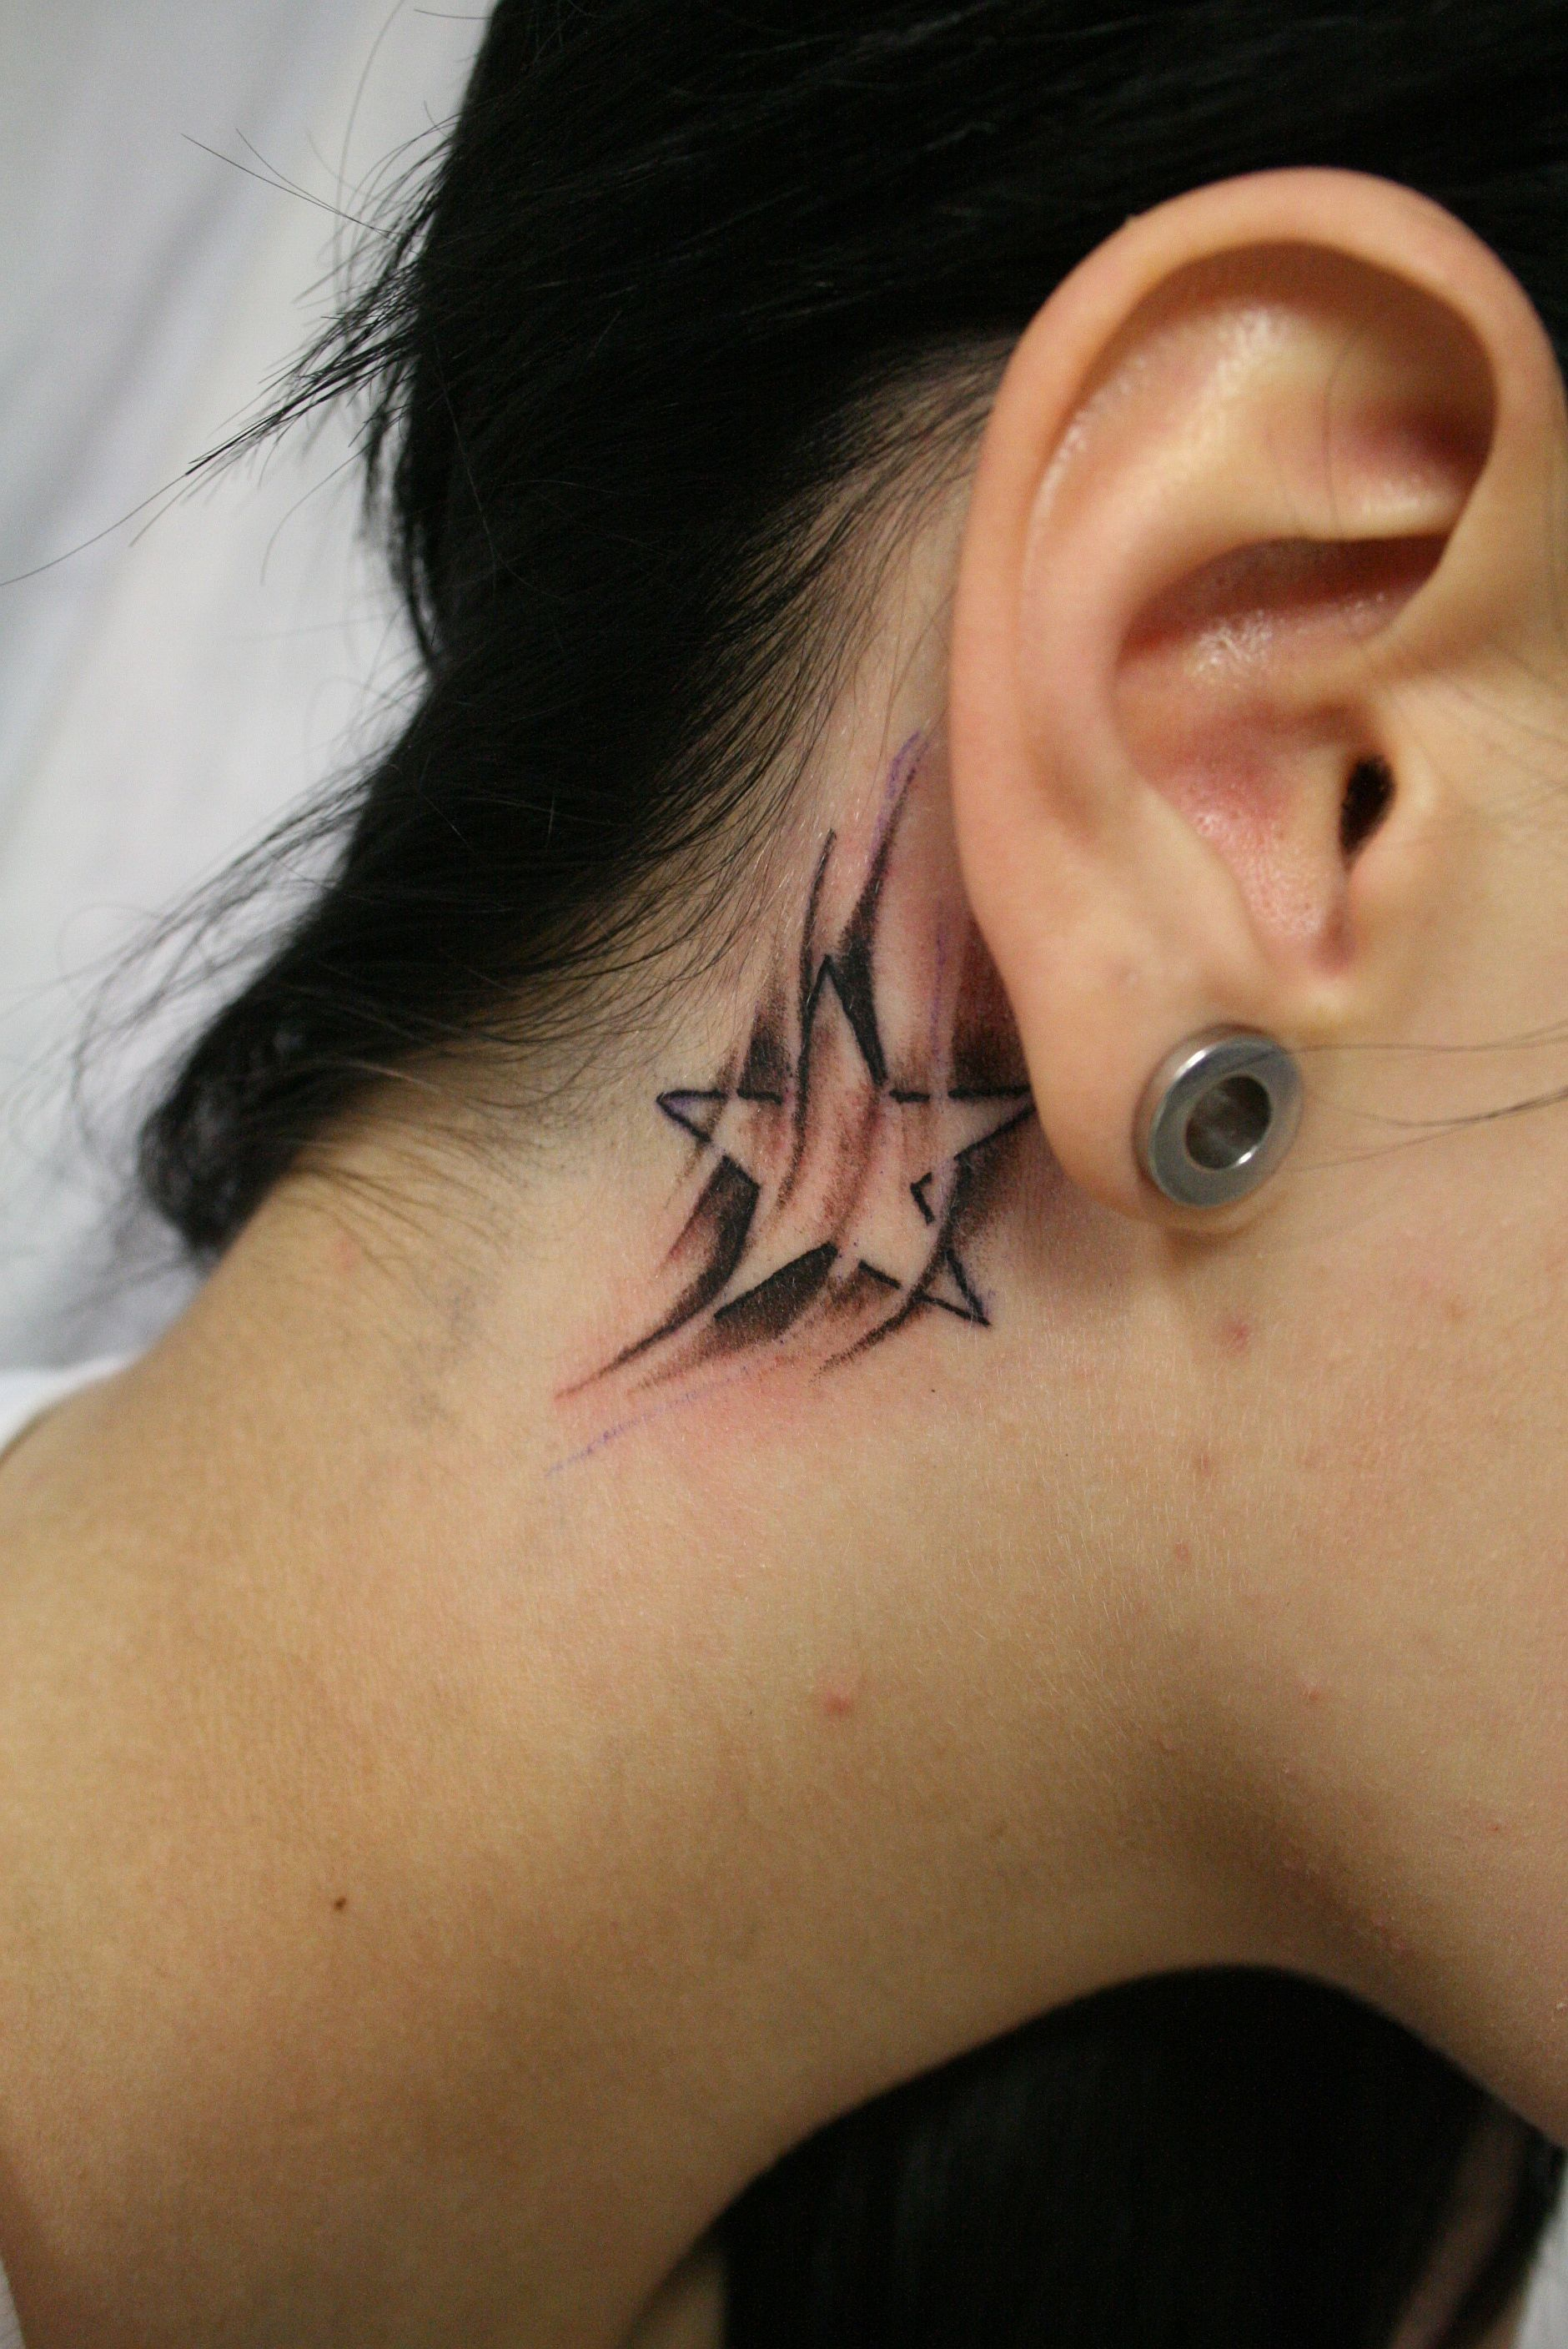 Astonishing Behind Ear Butterfly Tattoos Amazing Tattoo Design throughout dimensions 1880 X 2816